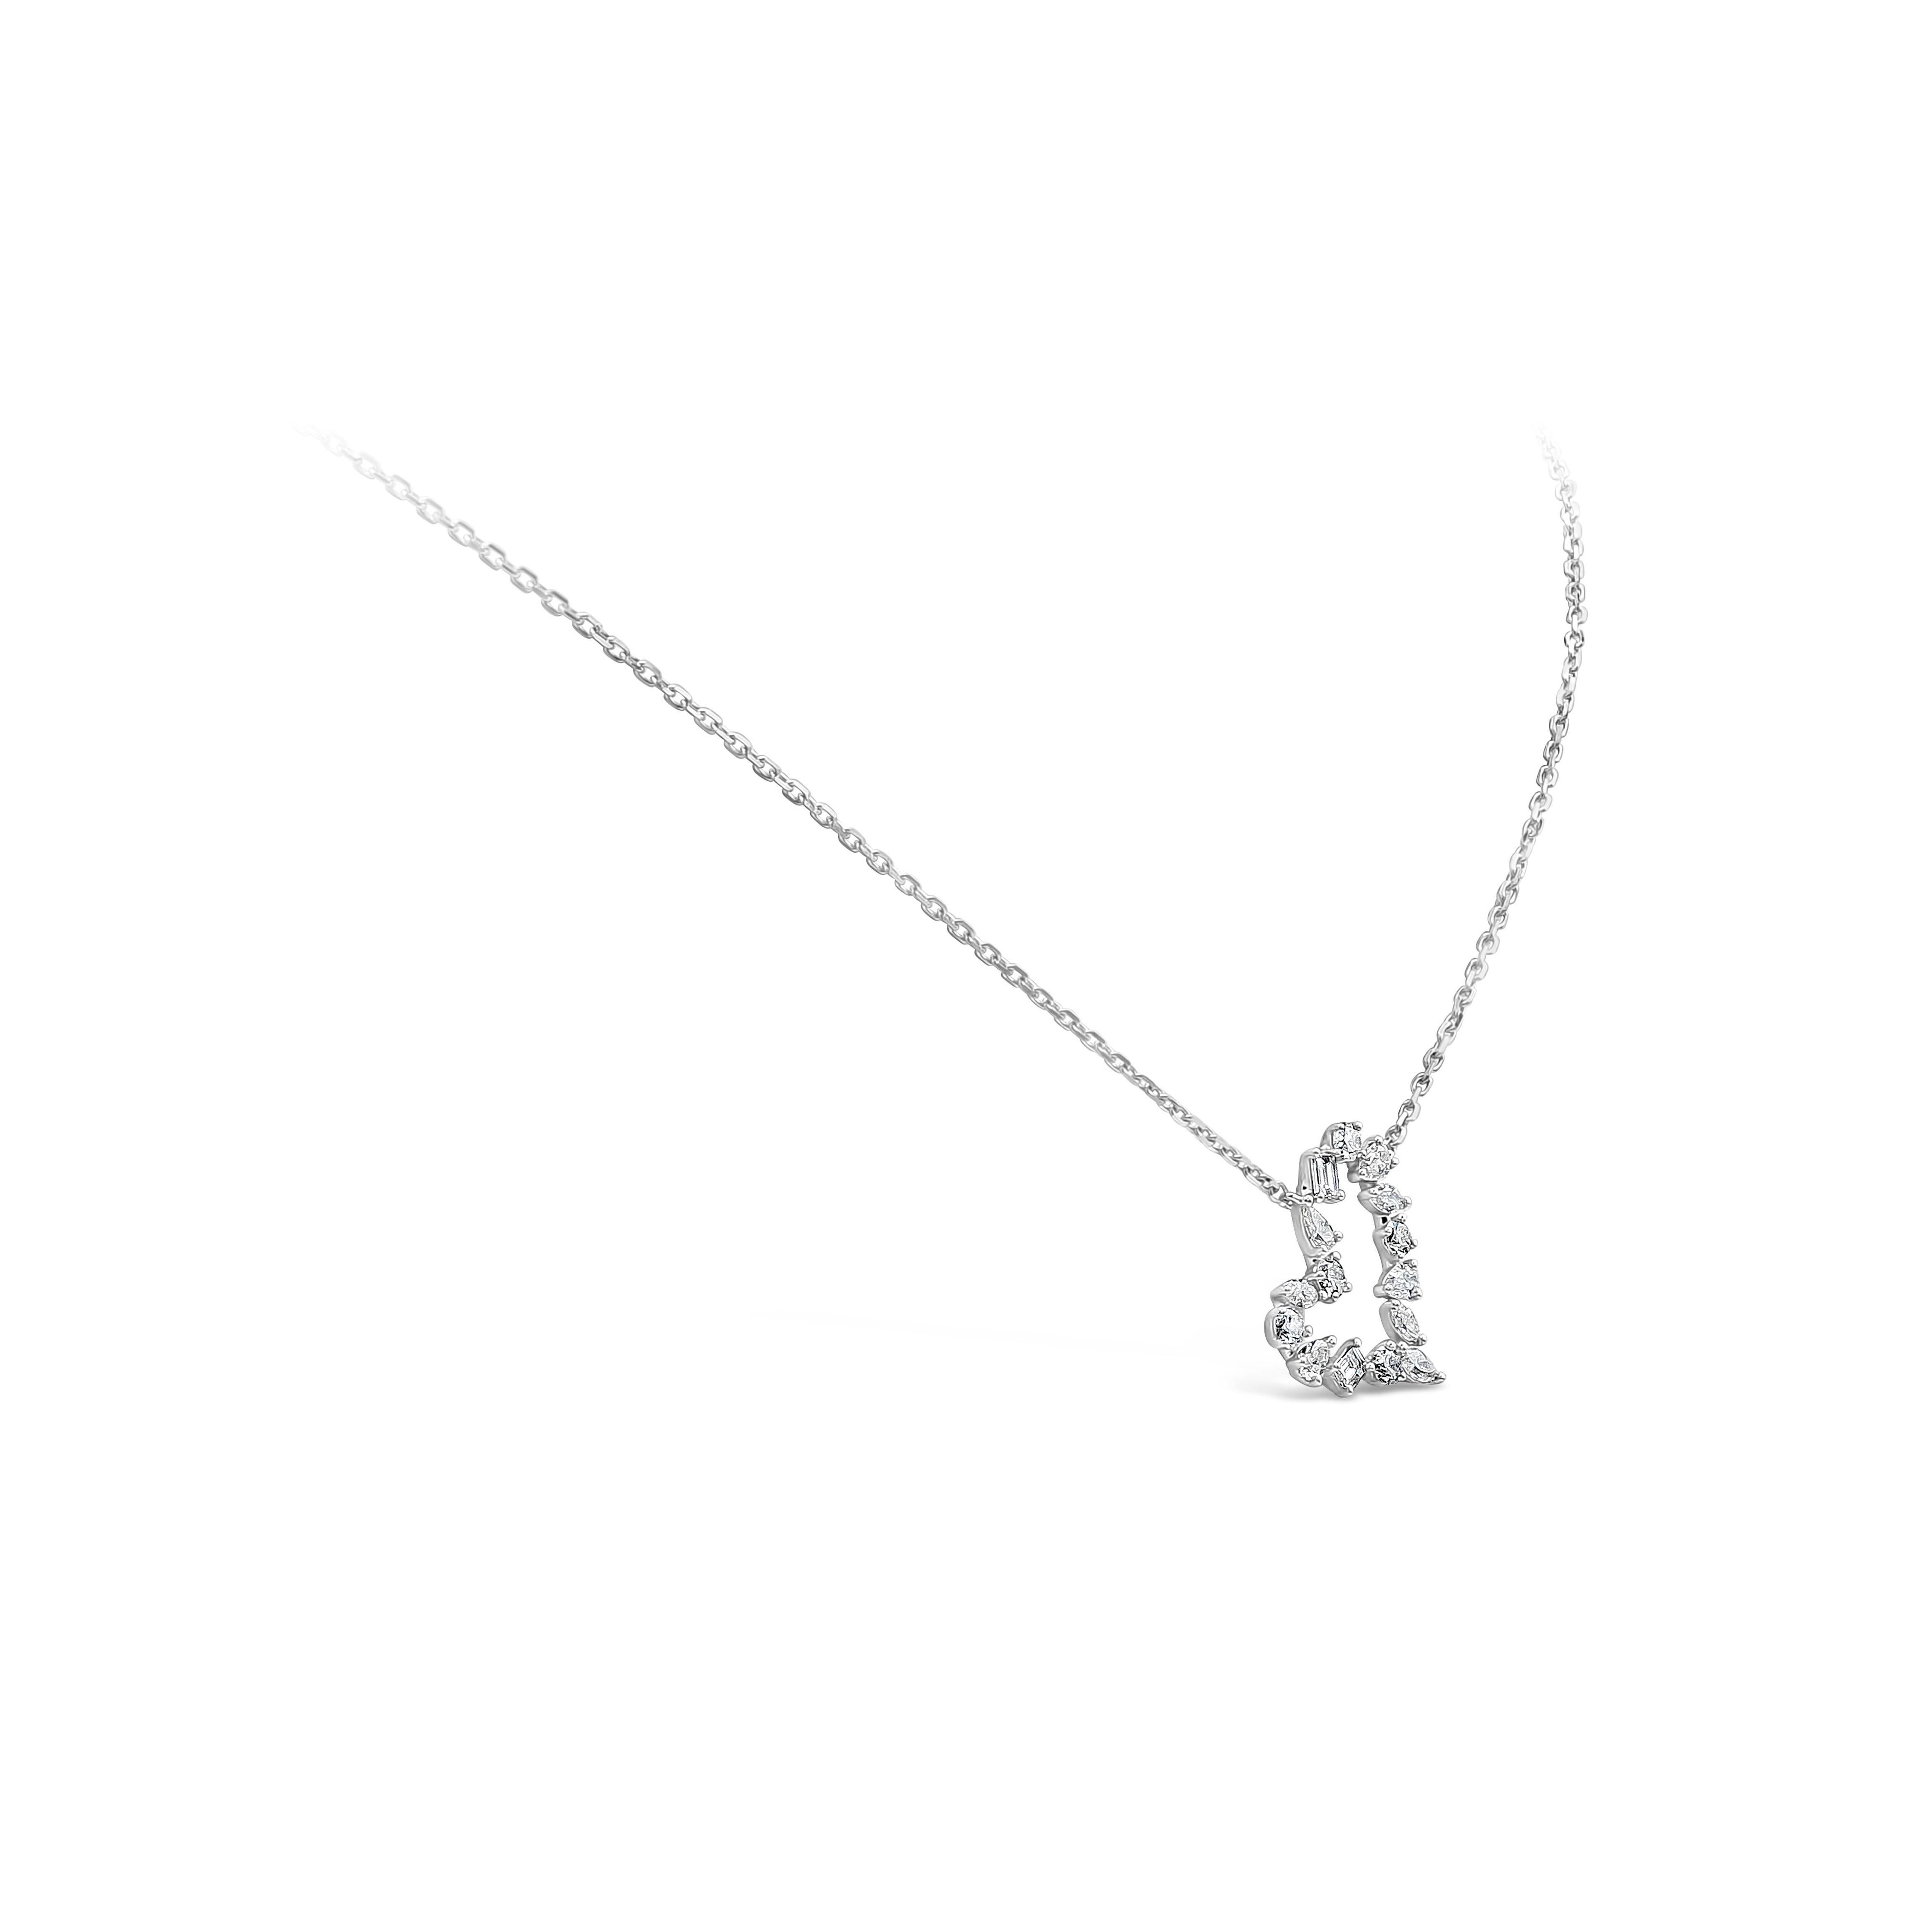 A unique open-work pendant necklace showcasing a row of fancy cut diamonds, arranged in a chic heart shape design. Diamonds weigh 0.79 carats total and are approximately F-G color, VS-SI in clarity. Suspended on an 18 inch adjustable white gold